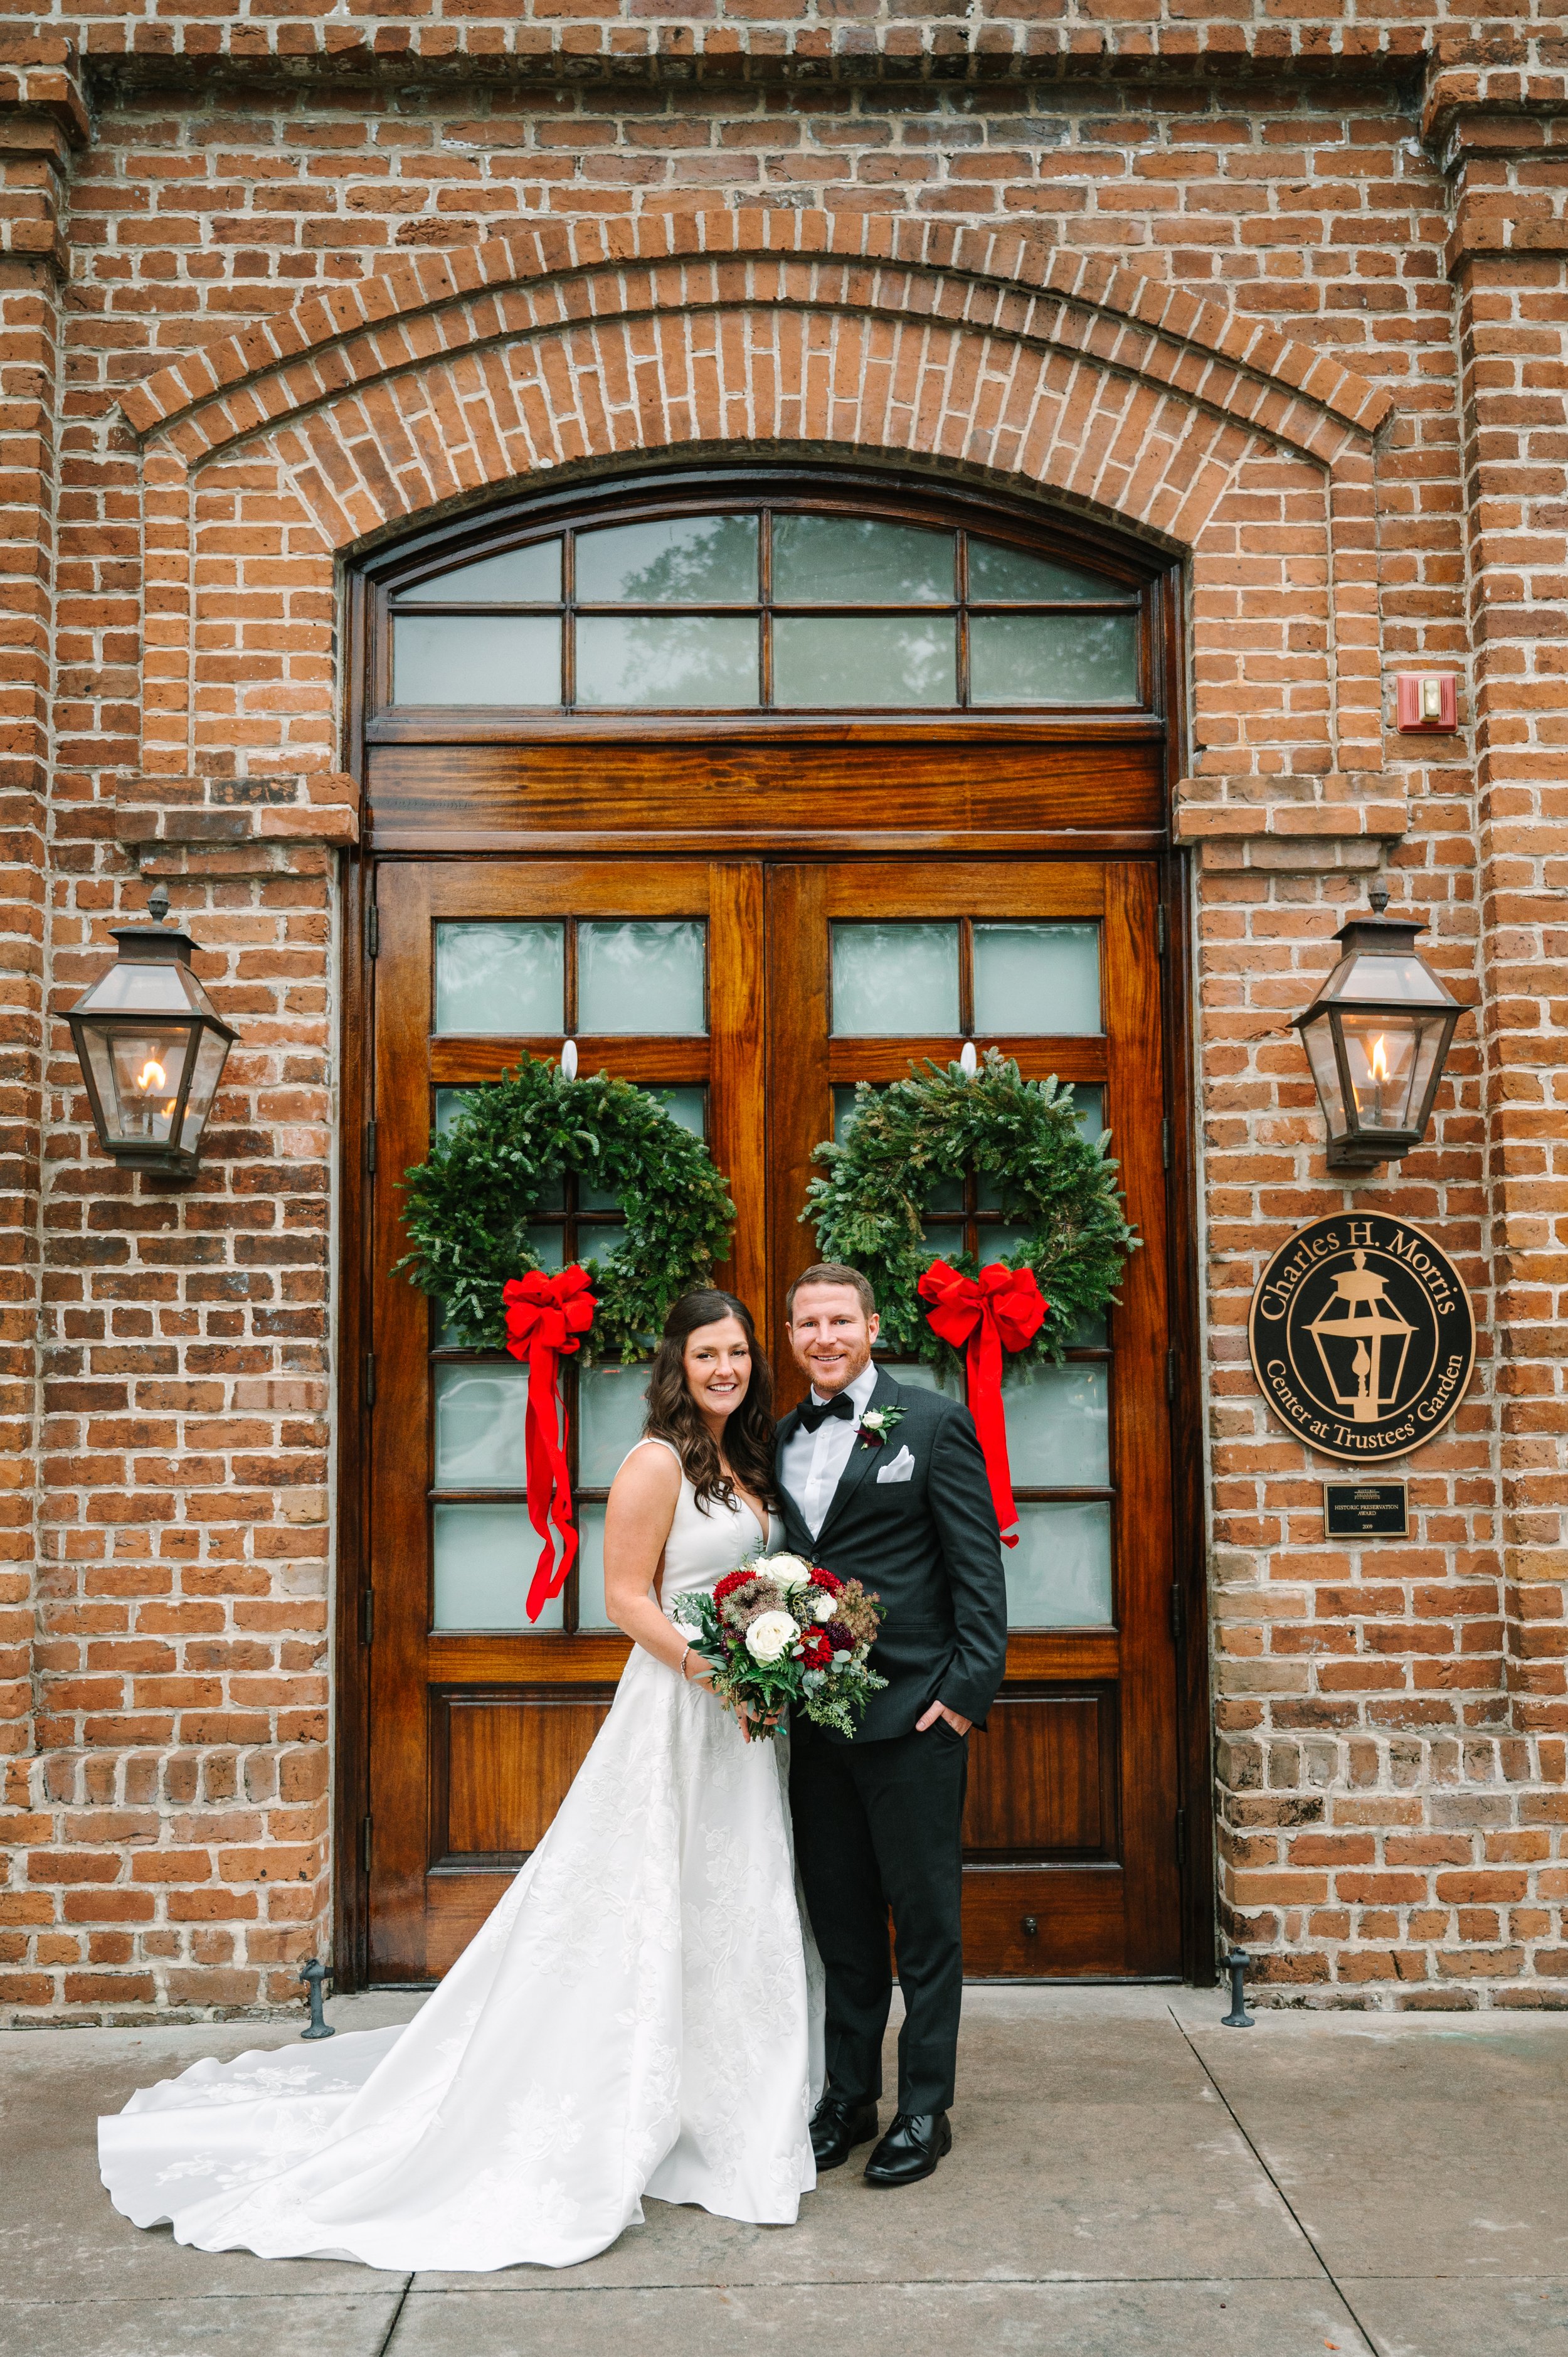 Megan-and-brians-winter-holiday-christmas-wedding-florals-designed-by-savannah-florist-ivory-and-beau-for-wedding-at-the-charles-morris-center-in-downtown-savannah-12.jpg